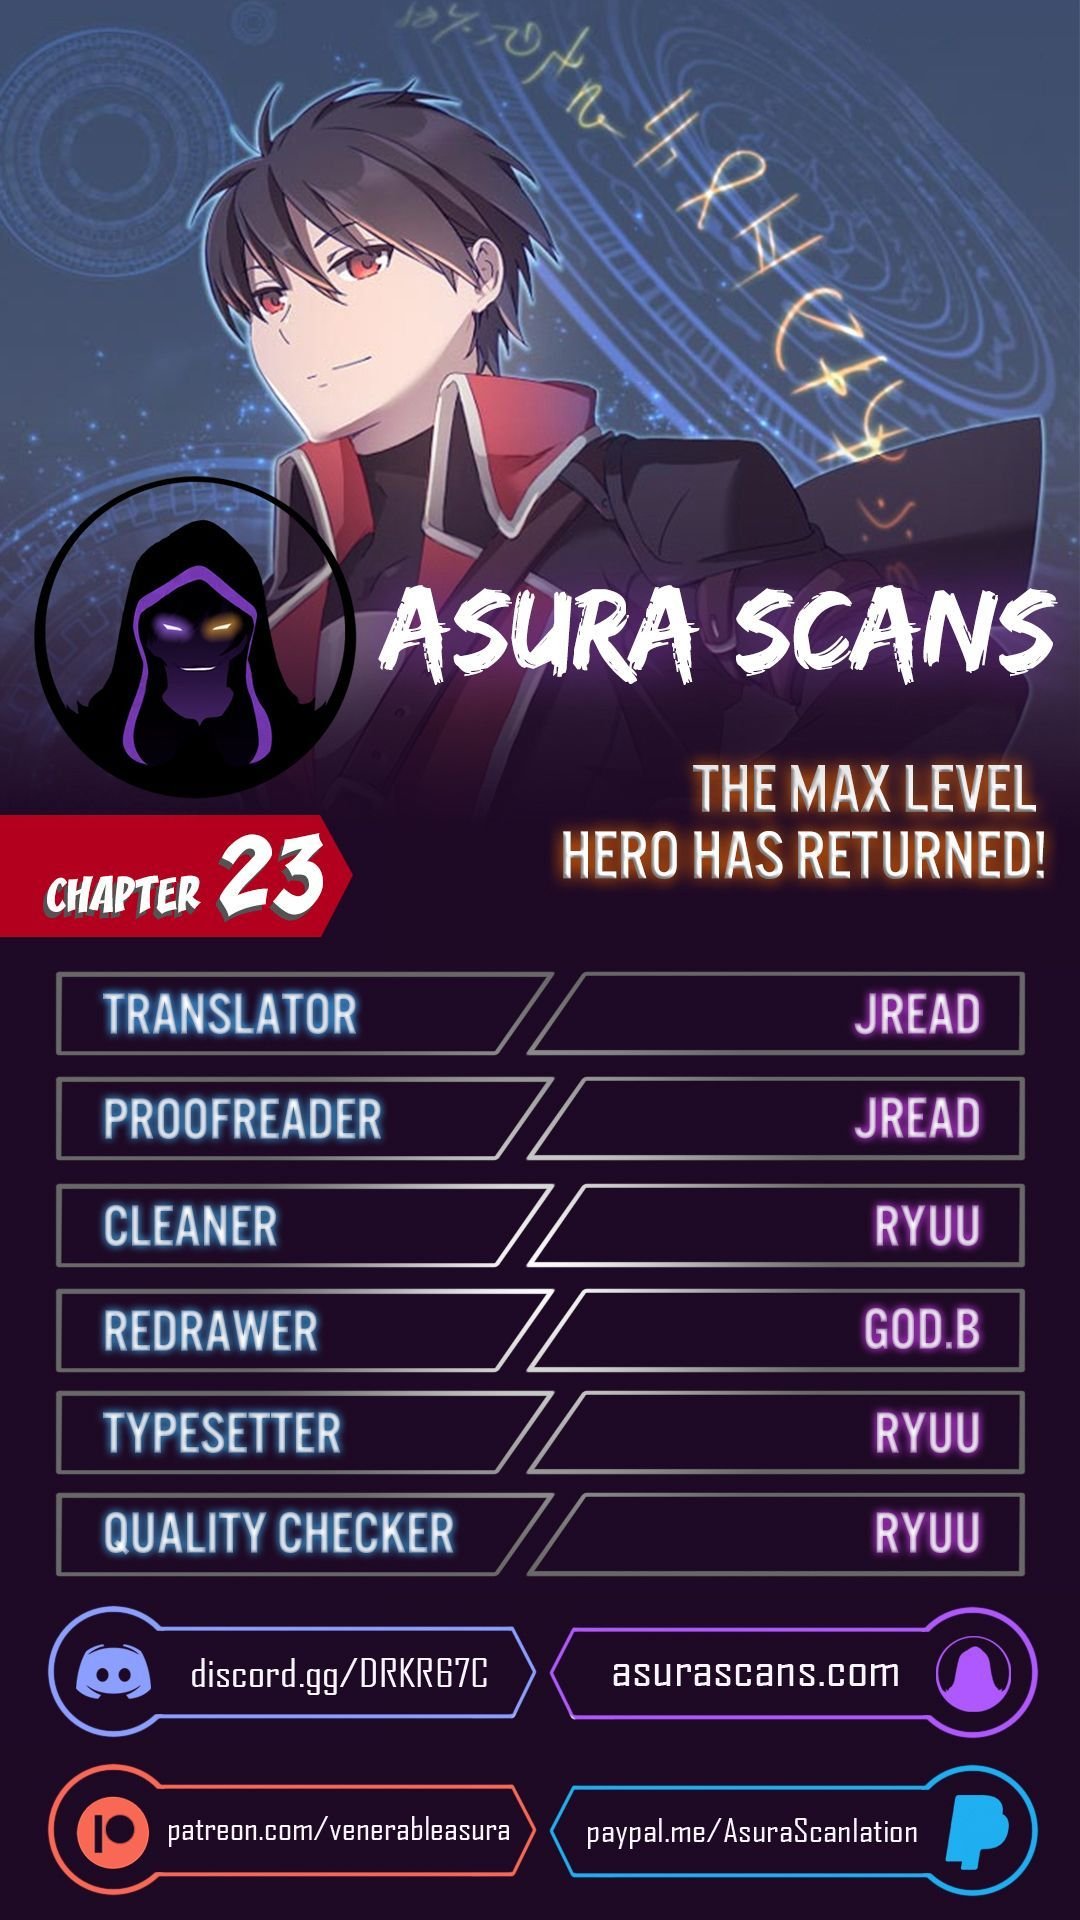 The MAX leveled hero will return! Chapter 23